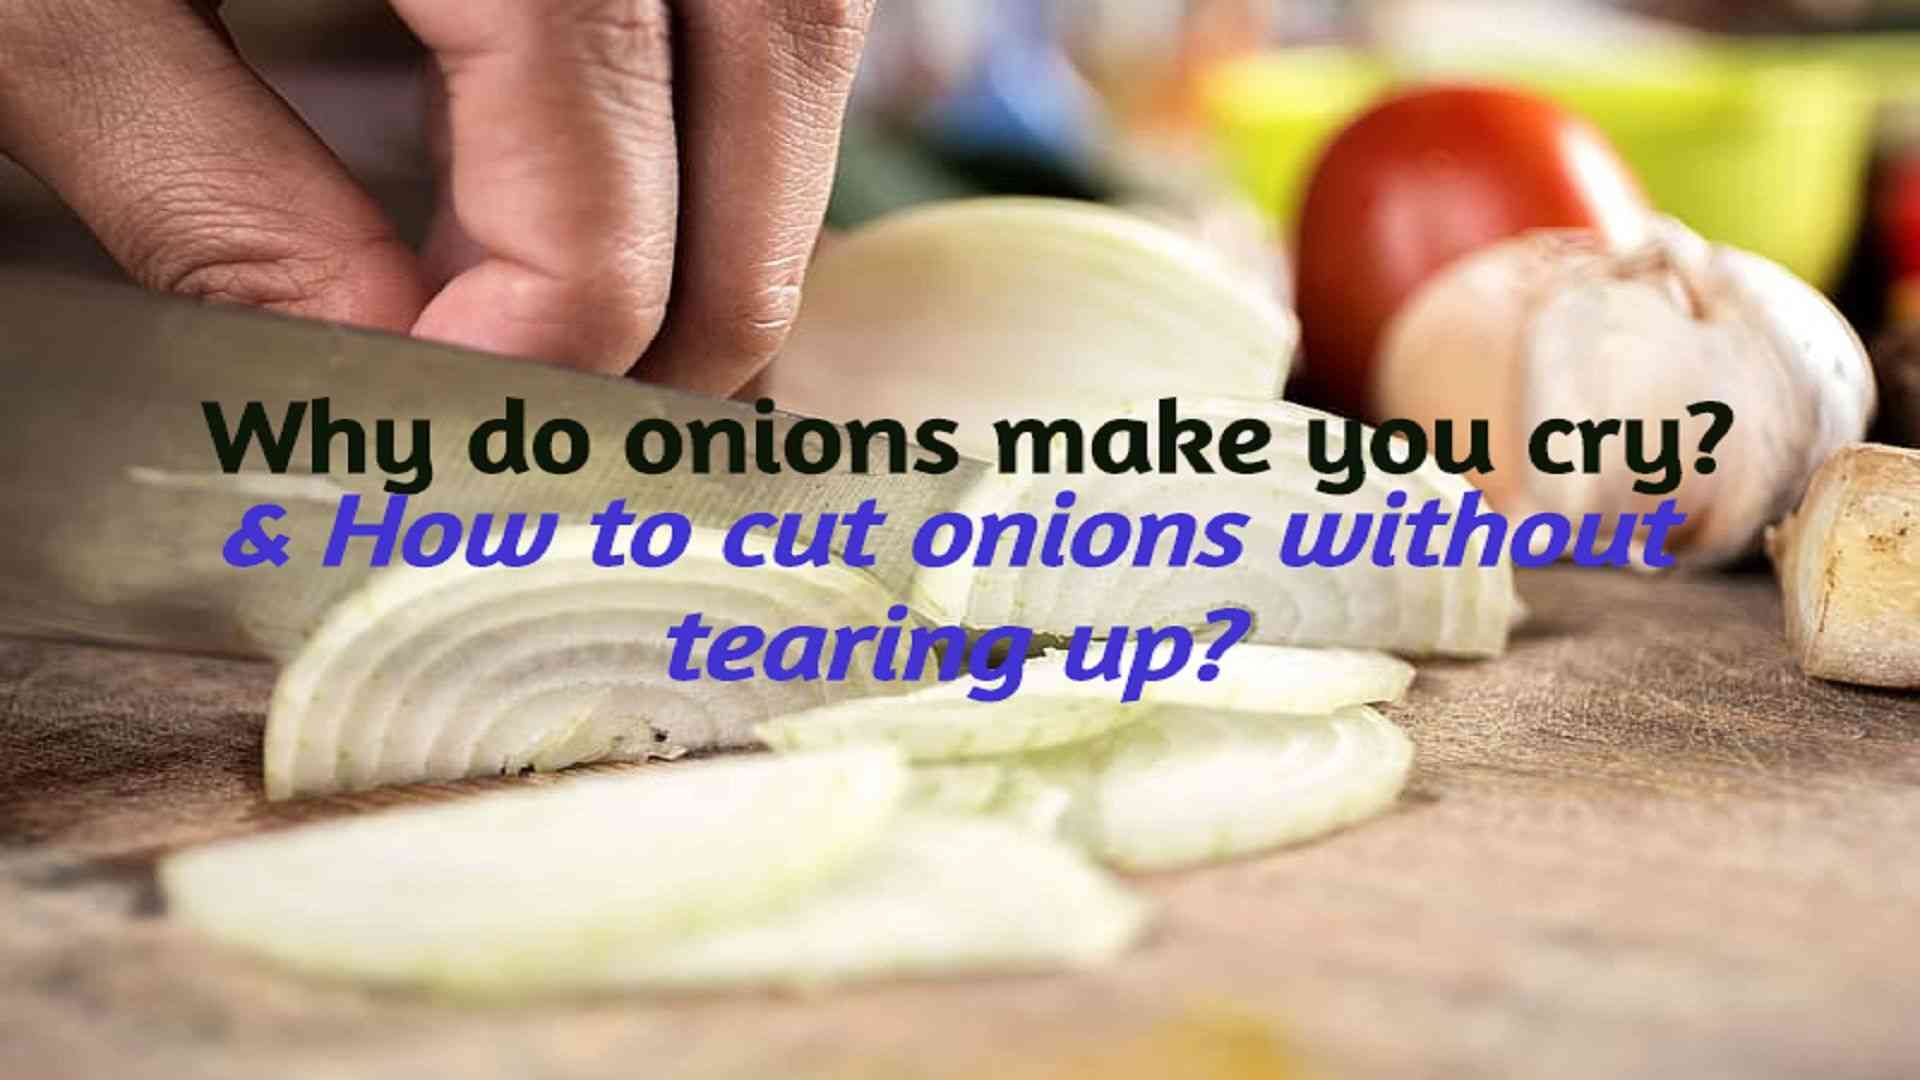 Why do onions make you cry & how can you cut onions without tearing up?